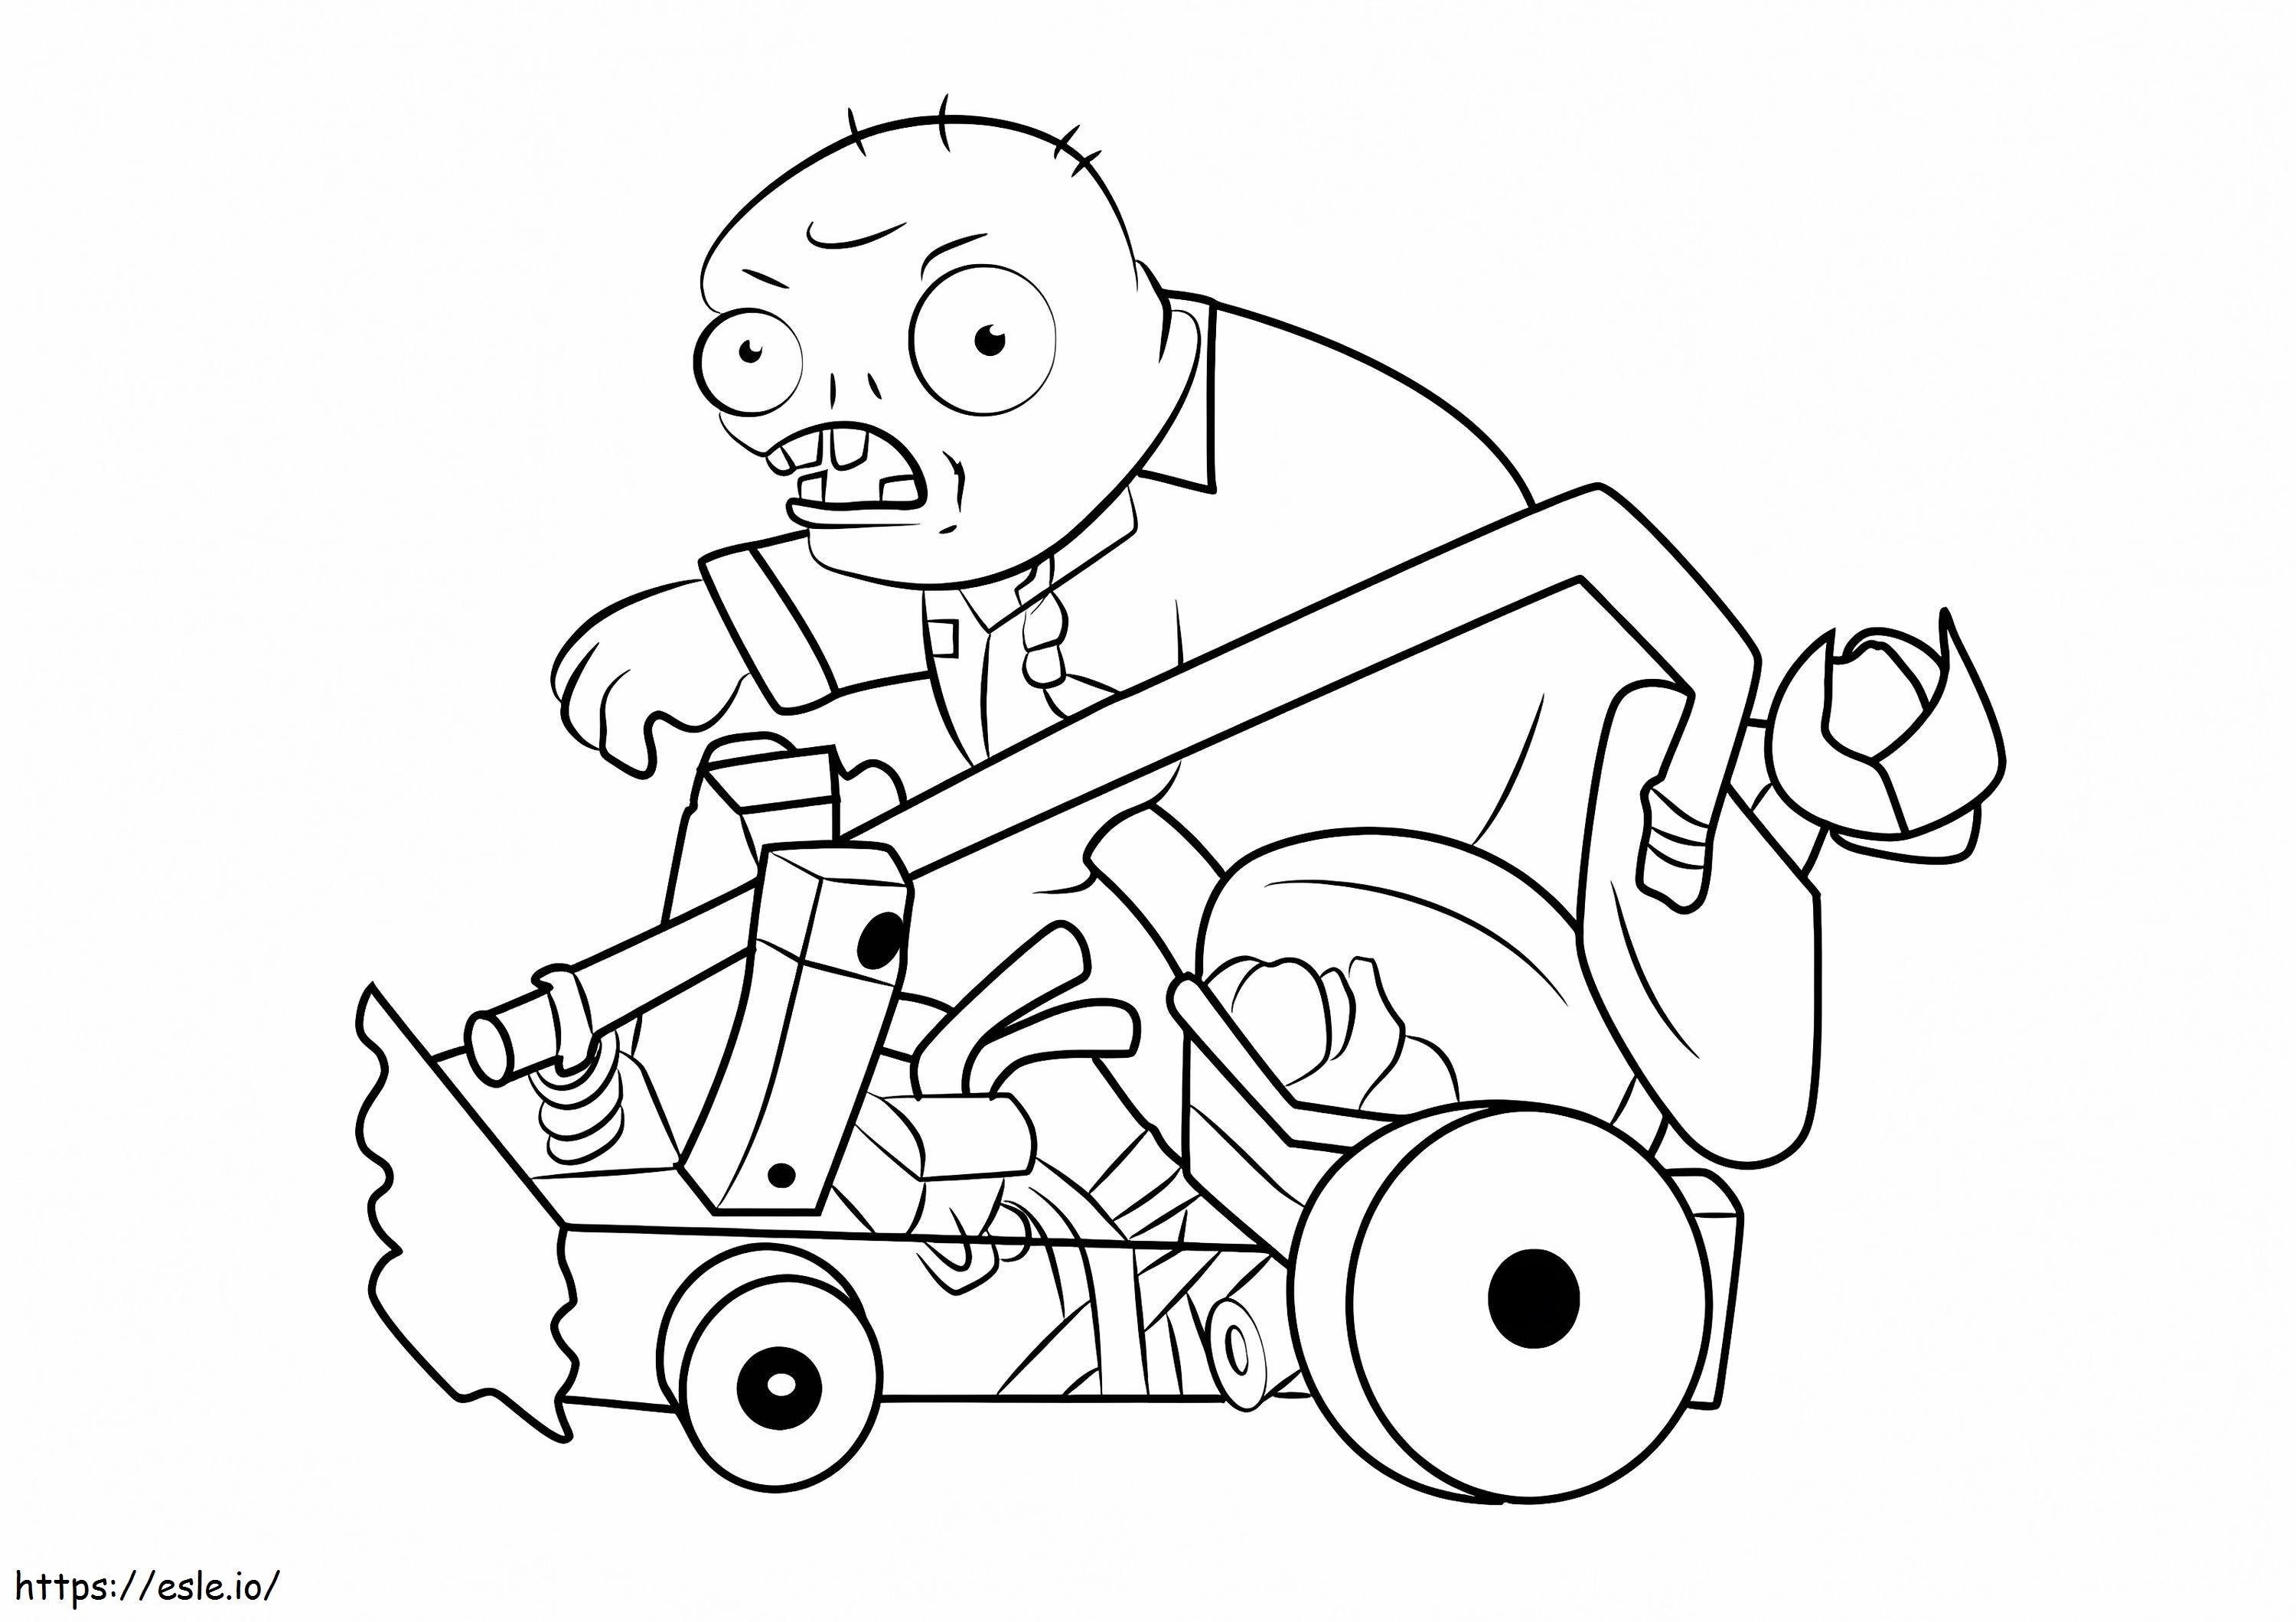 1530496301 Catapult Zombie1 coloring page